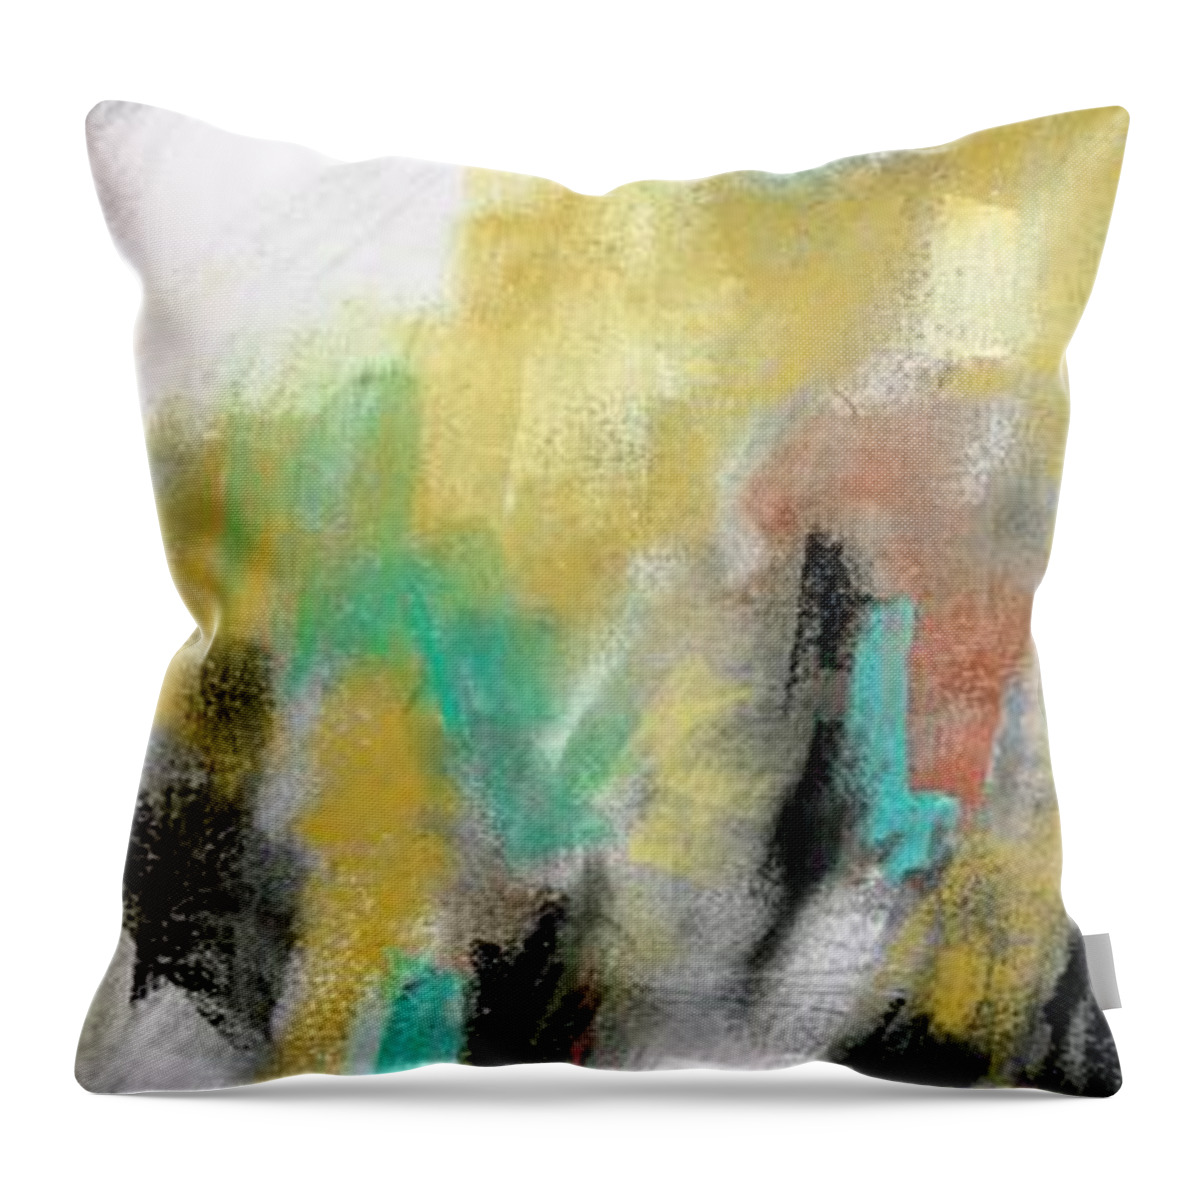 Equine Art Throw Pillow featuring the painting New Mexico Horse 4 by Frances Marino